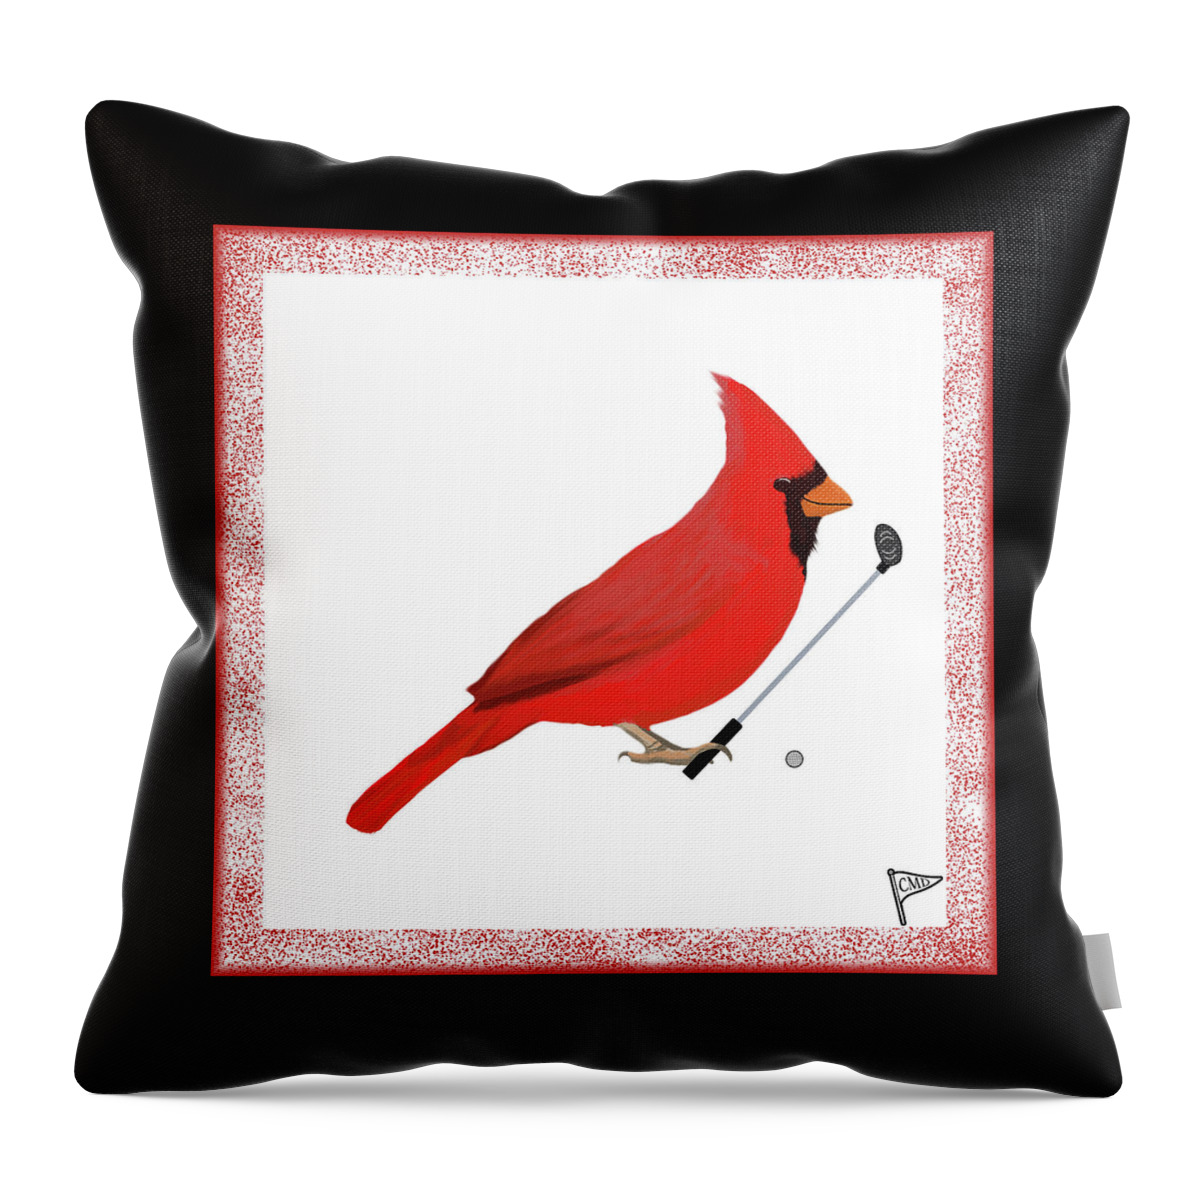 UNIVERSITY OF LOUISVILLE CARDINALS TAPESTRY COLLEGE AFGHAN THROW